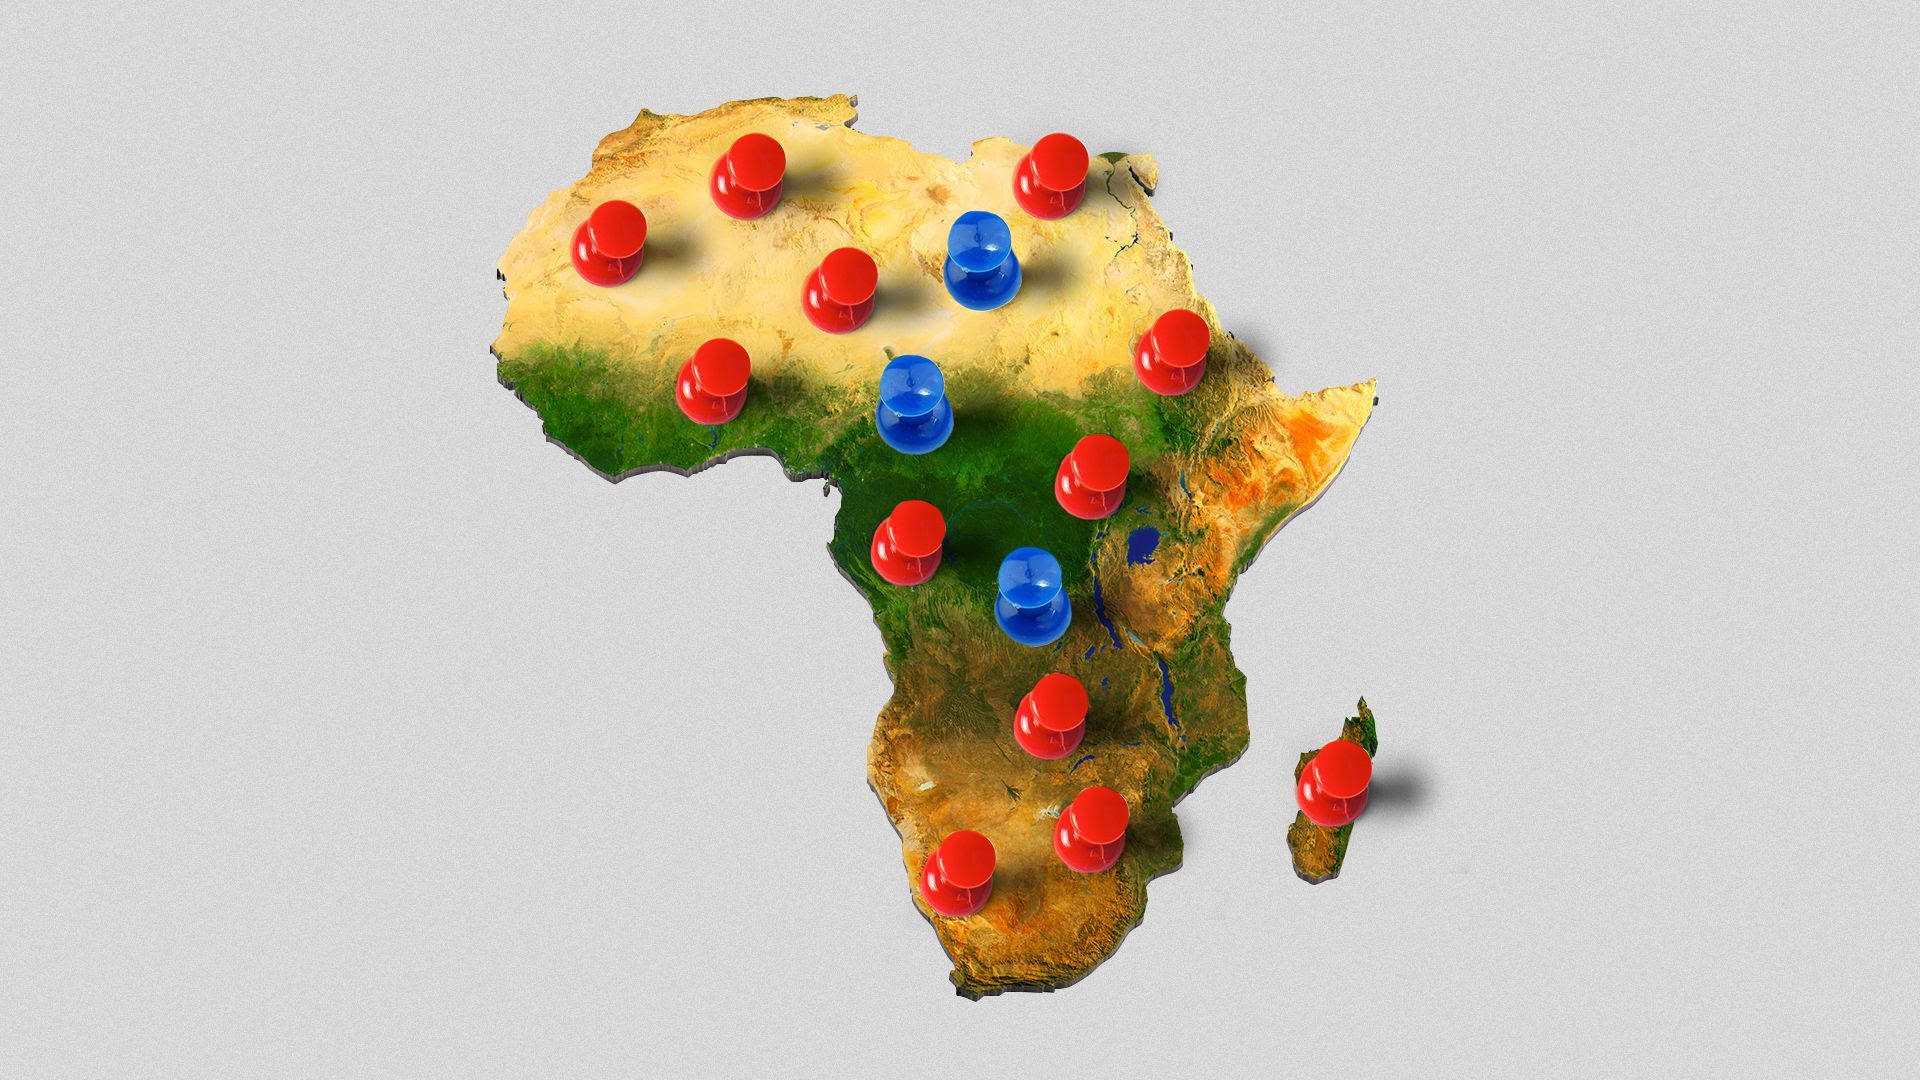 Illustration of map of Africa covered in push pins